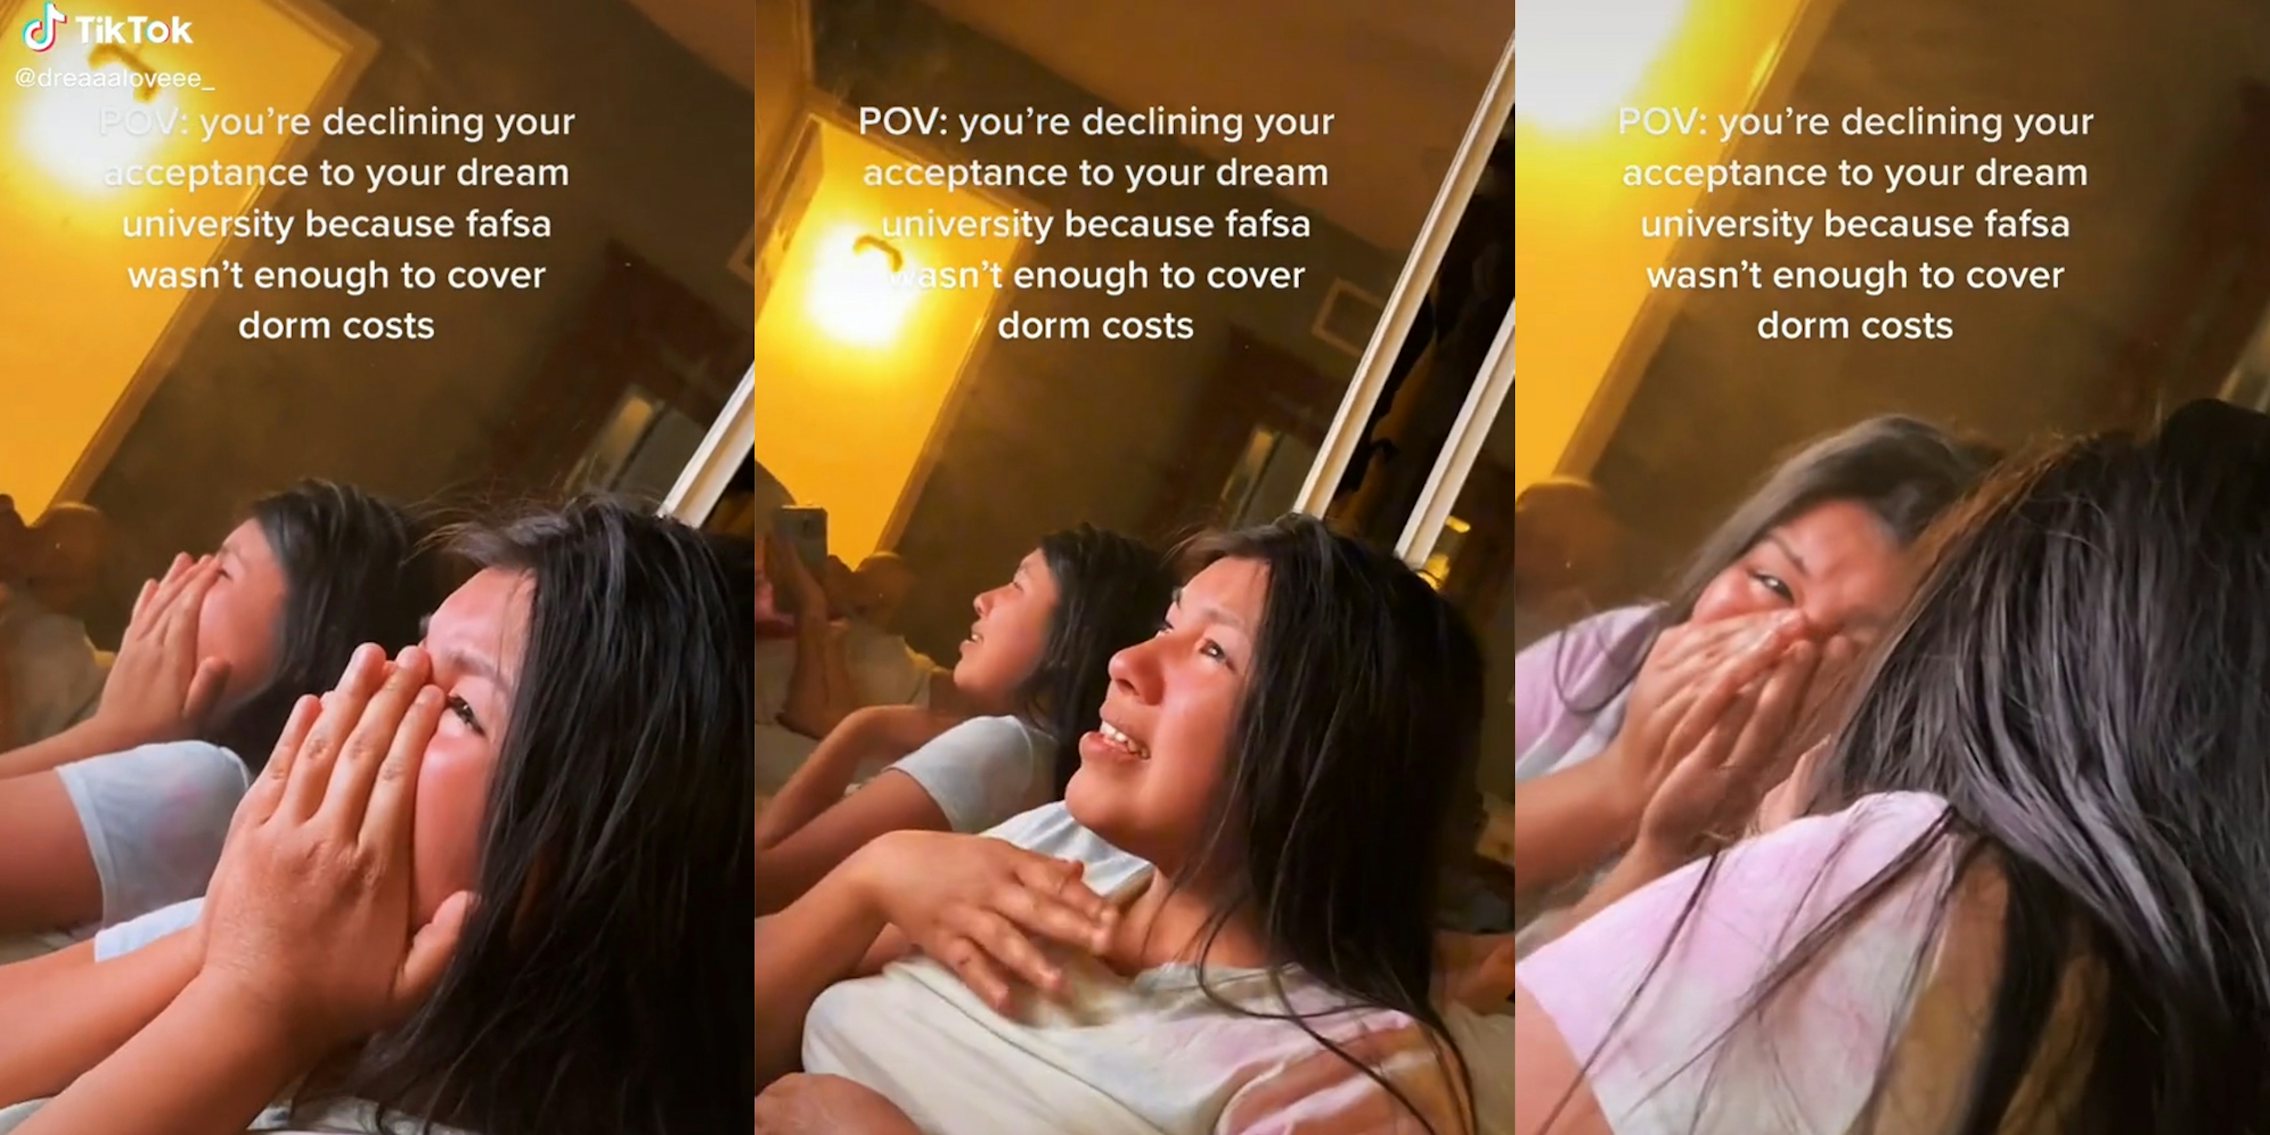 young woman crying with caption 'POV: you're declining your acceptance to your dream university because fafsa wasn't enough to cover dorm costs'